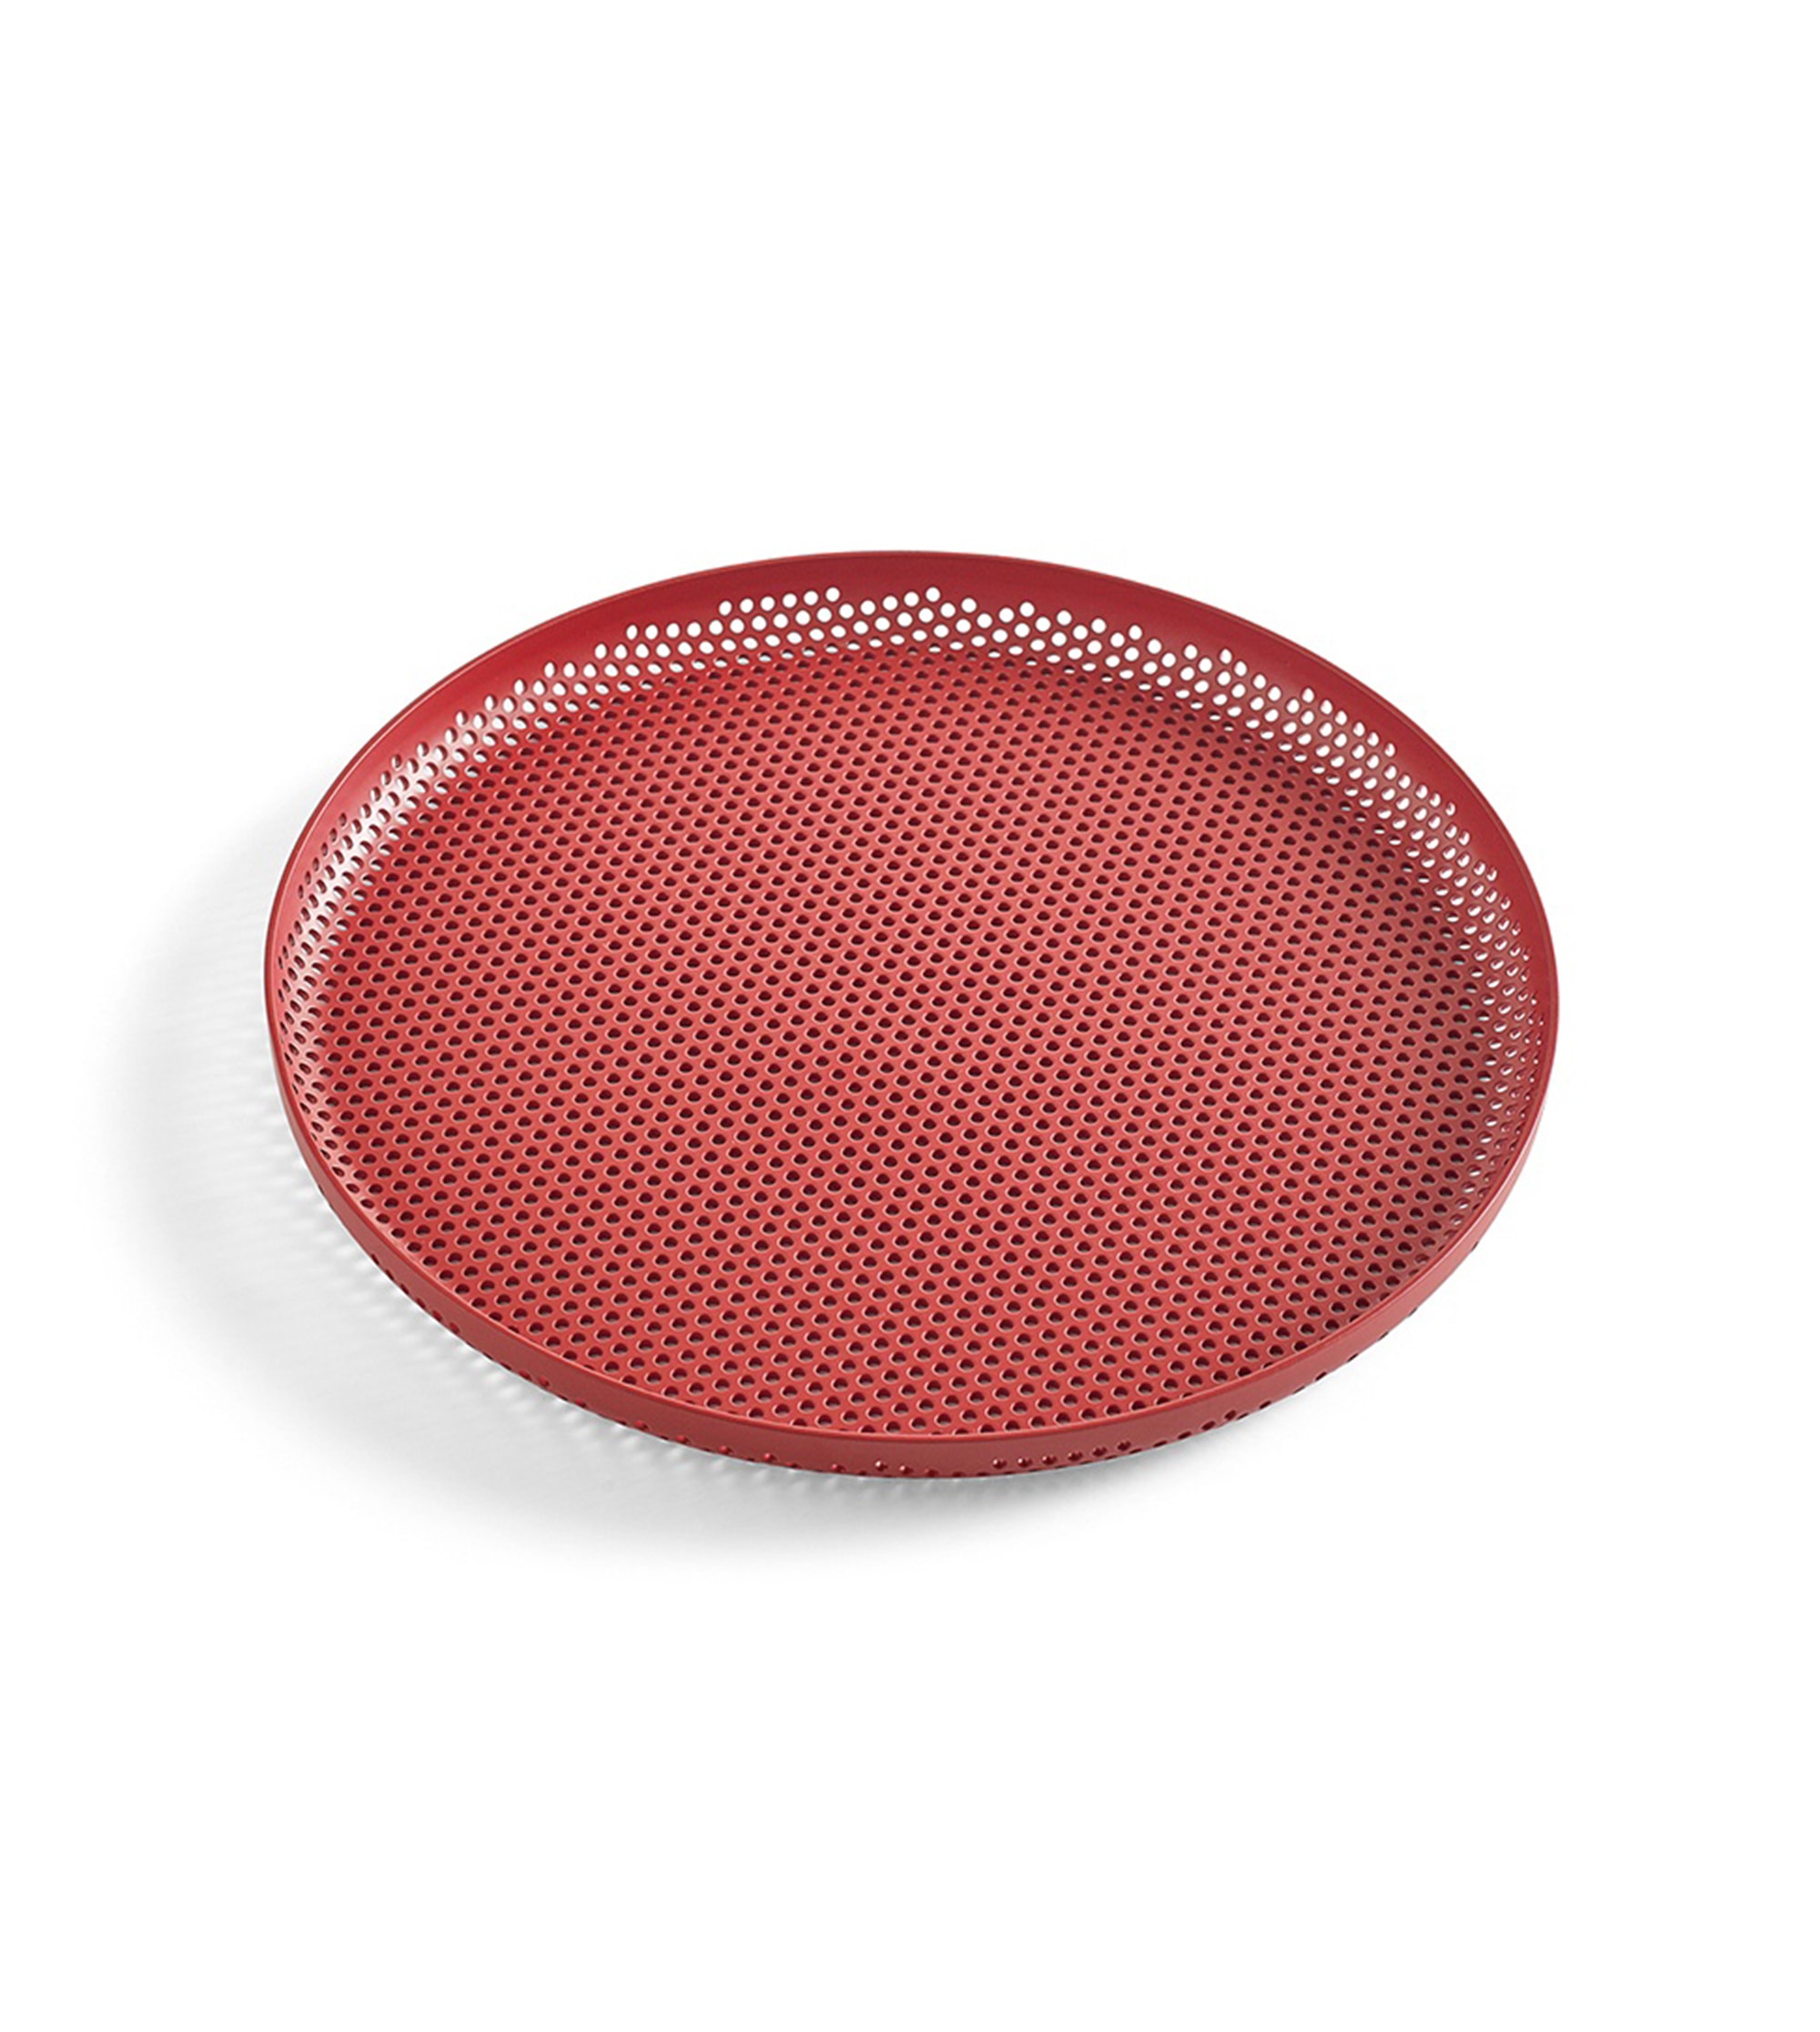 PLATEAU PERFORÉ / PERFORATED TRAY TAILLE M HAY